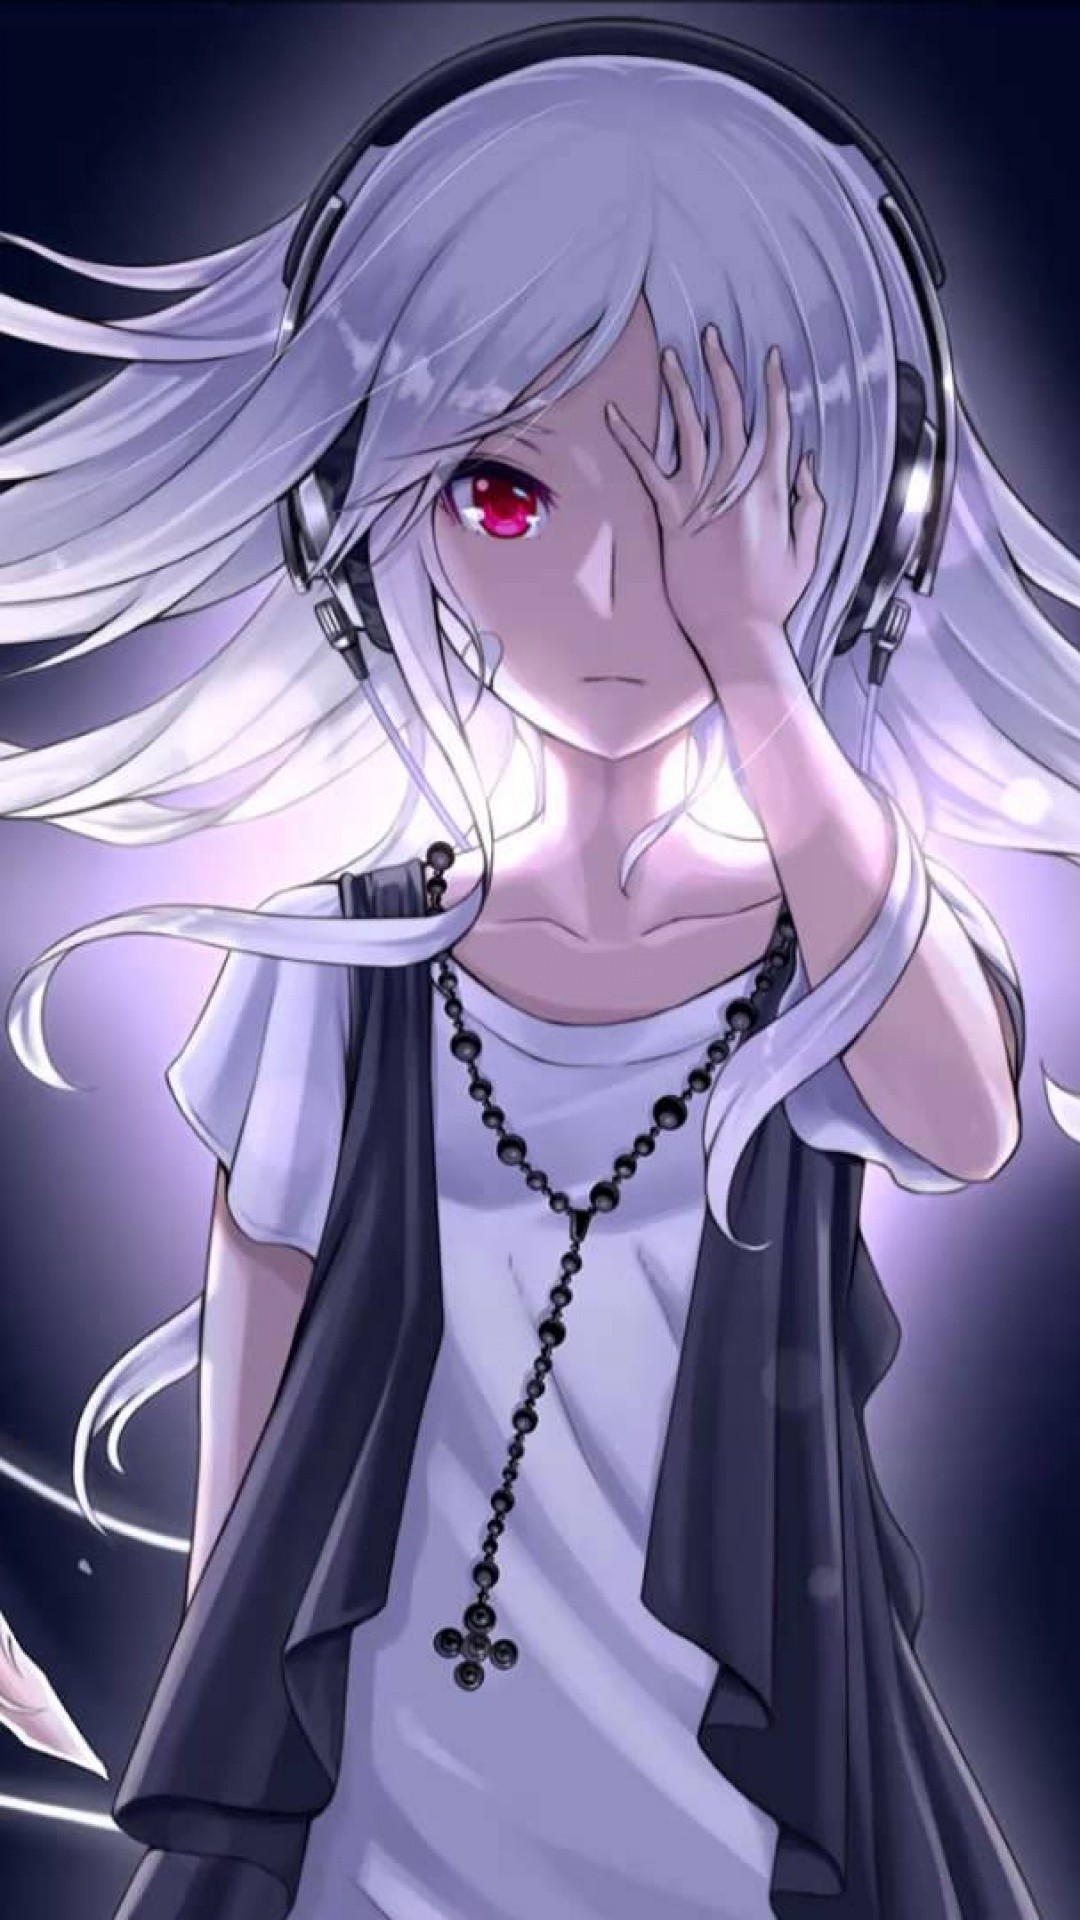 1080x1920 Anime Girl With White Hair Iphone Wallpaper | Id: 50397